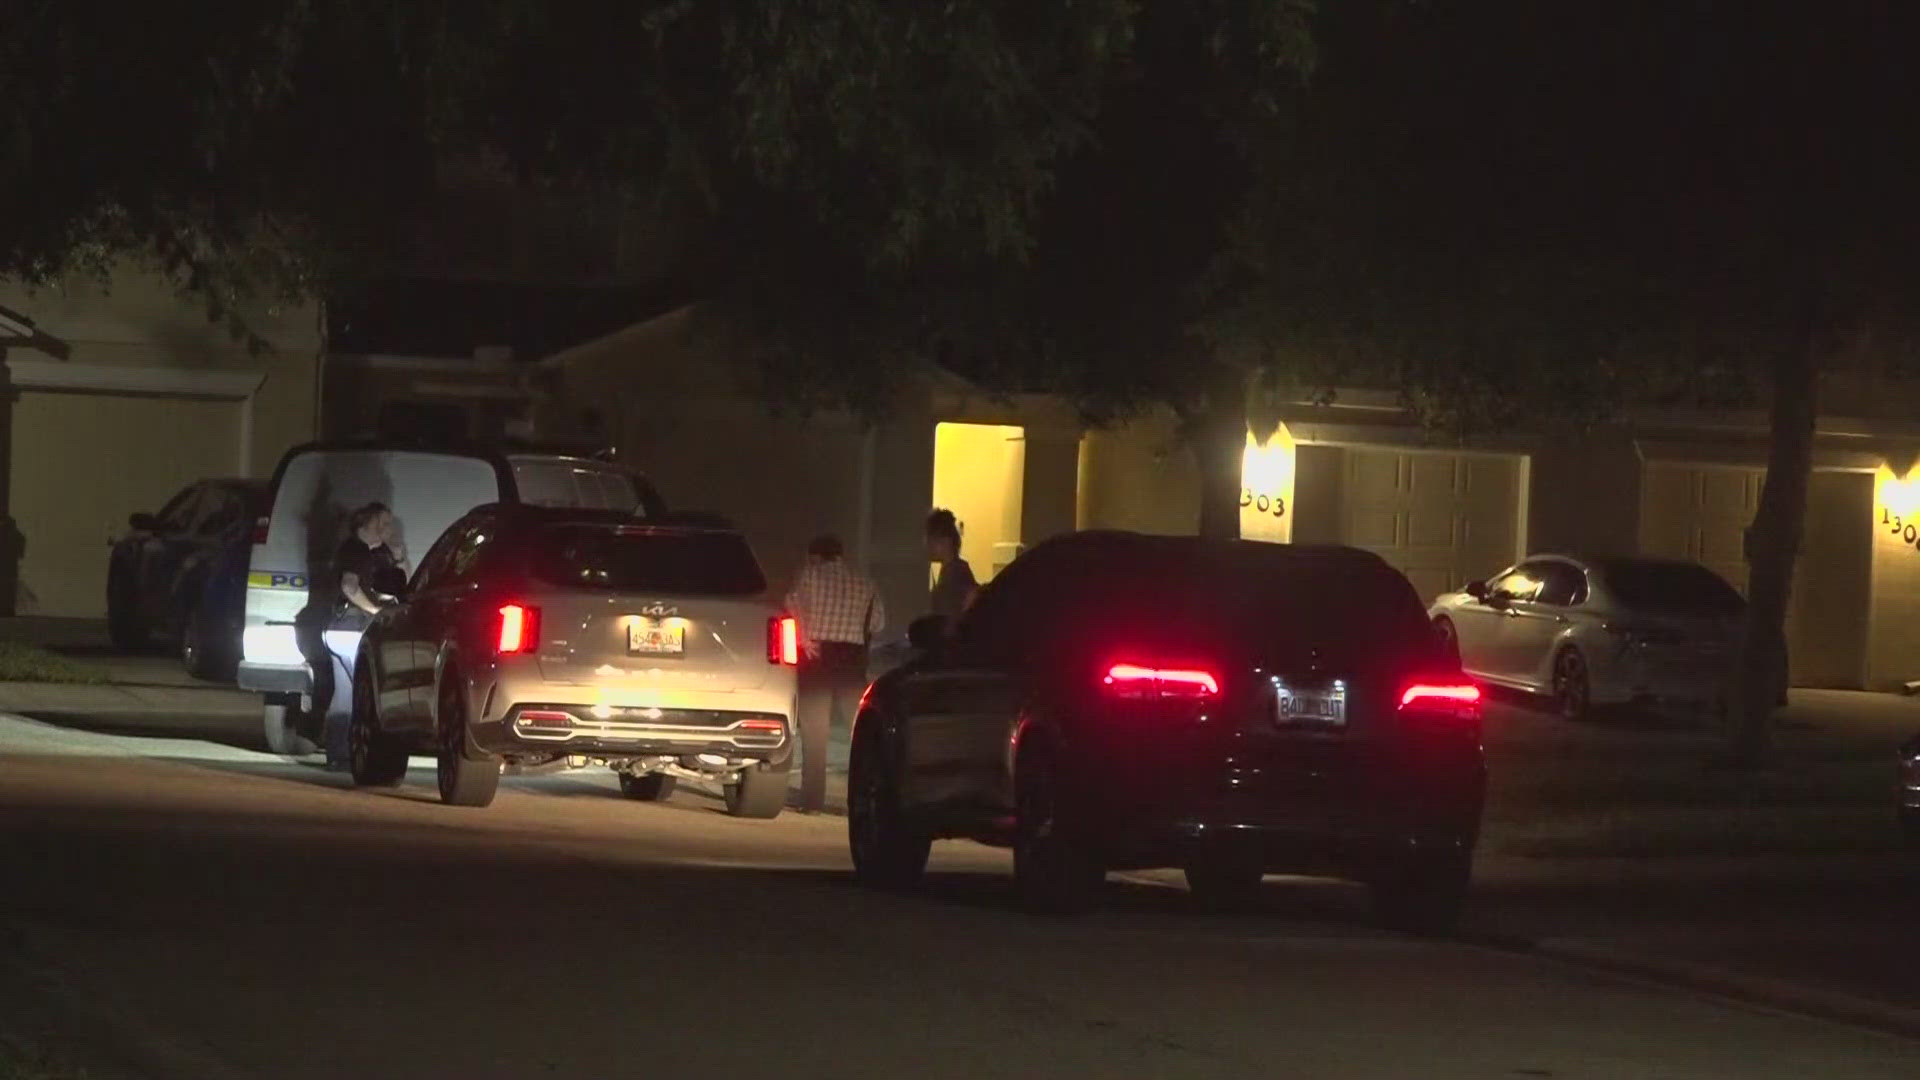 Police say the woman may have been shot from outside her condo and that the shooting appears to have been targeted.